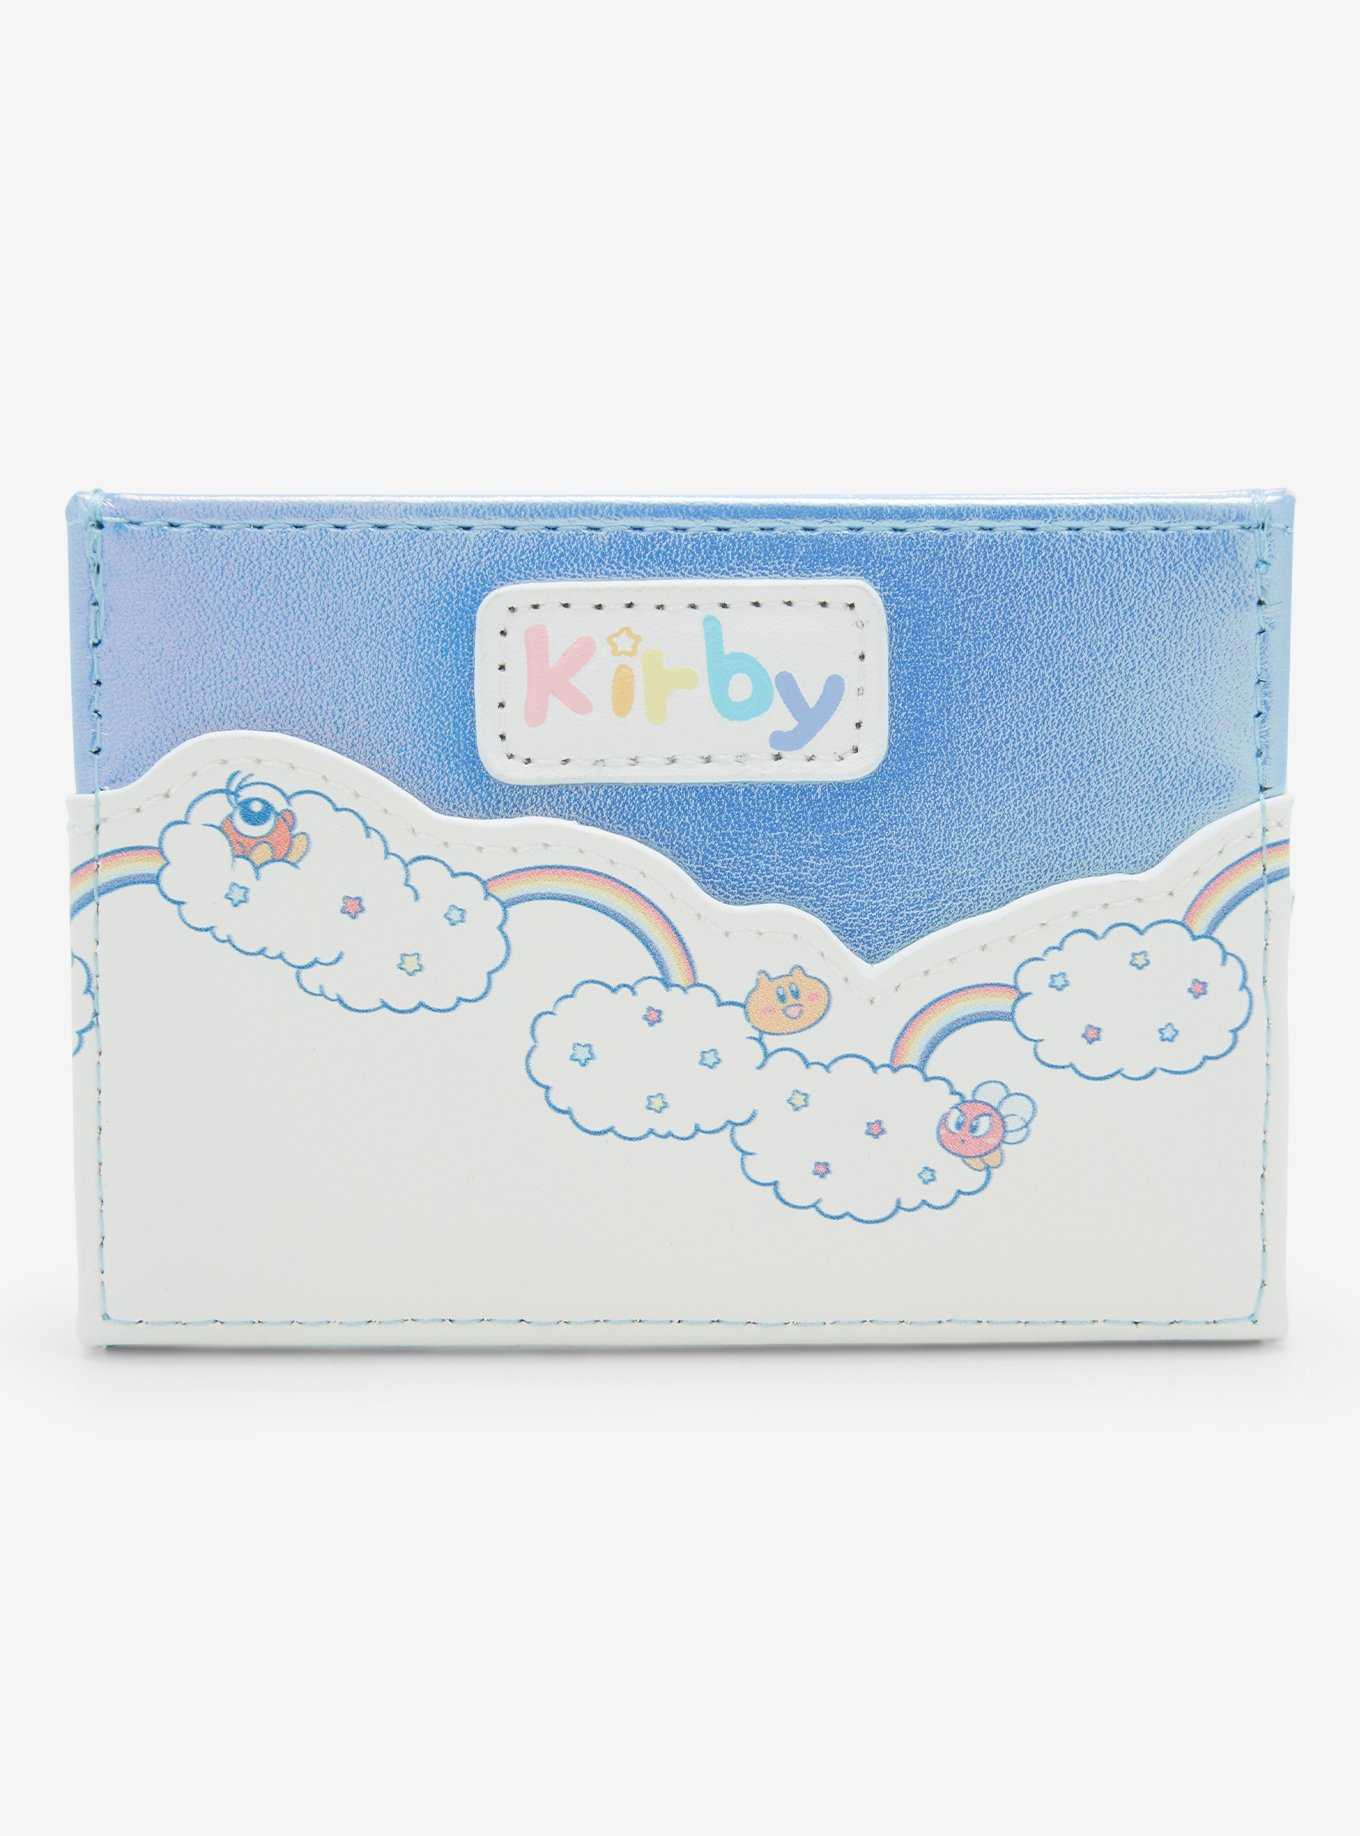 Nintendo Kirby Picnic Scene Cardholder - BoxLunch Exclusive, , hi-res